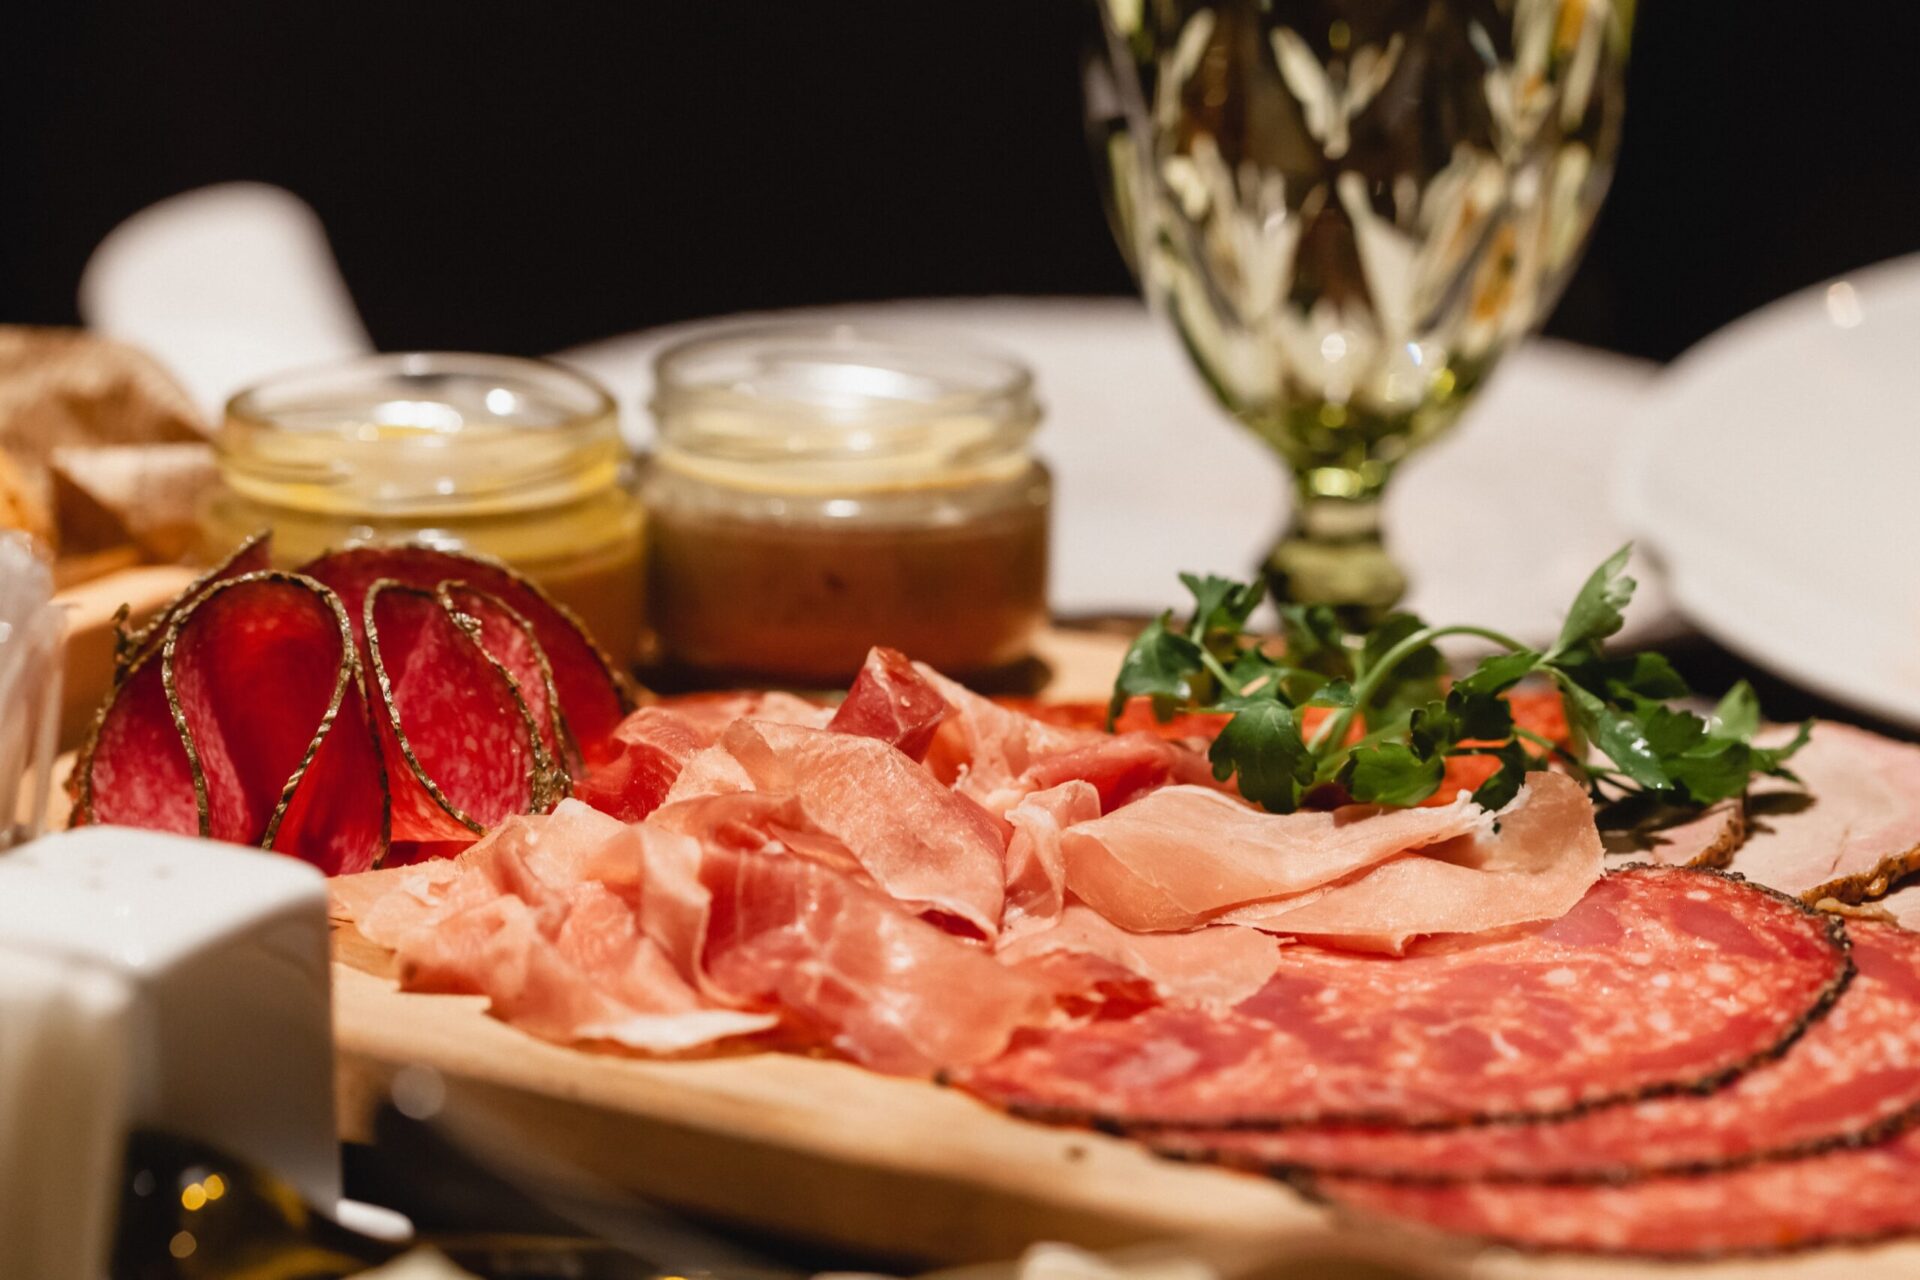 What is charcuterie and how should you serve it?